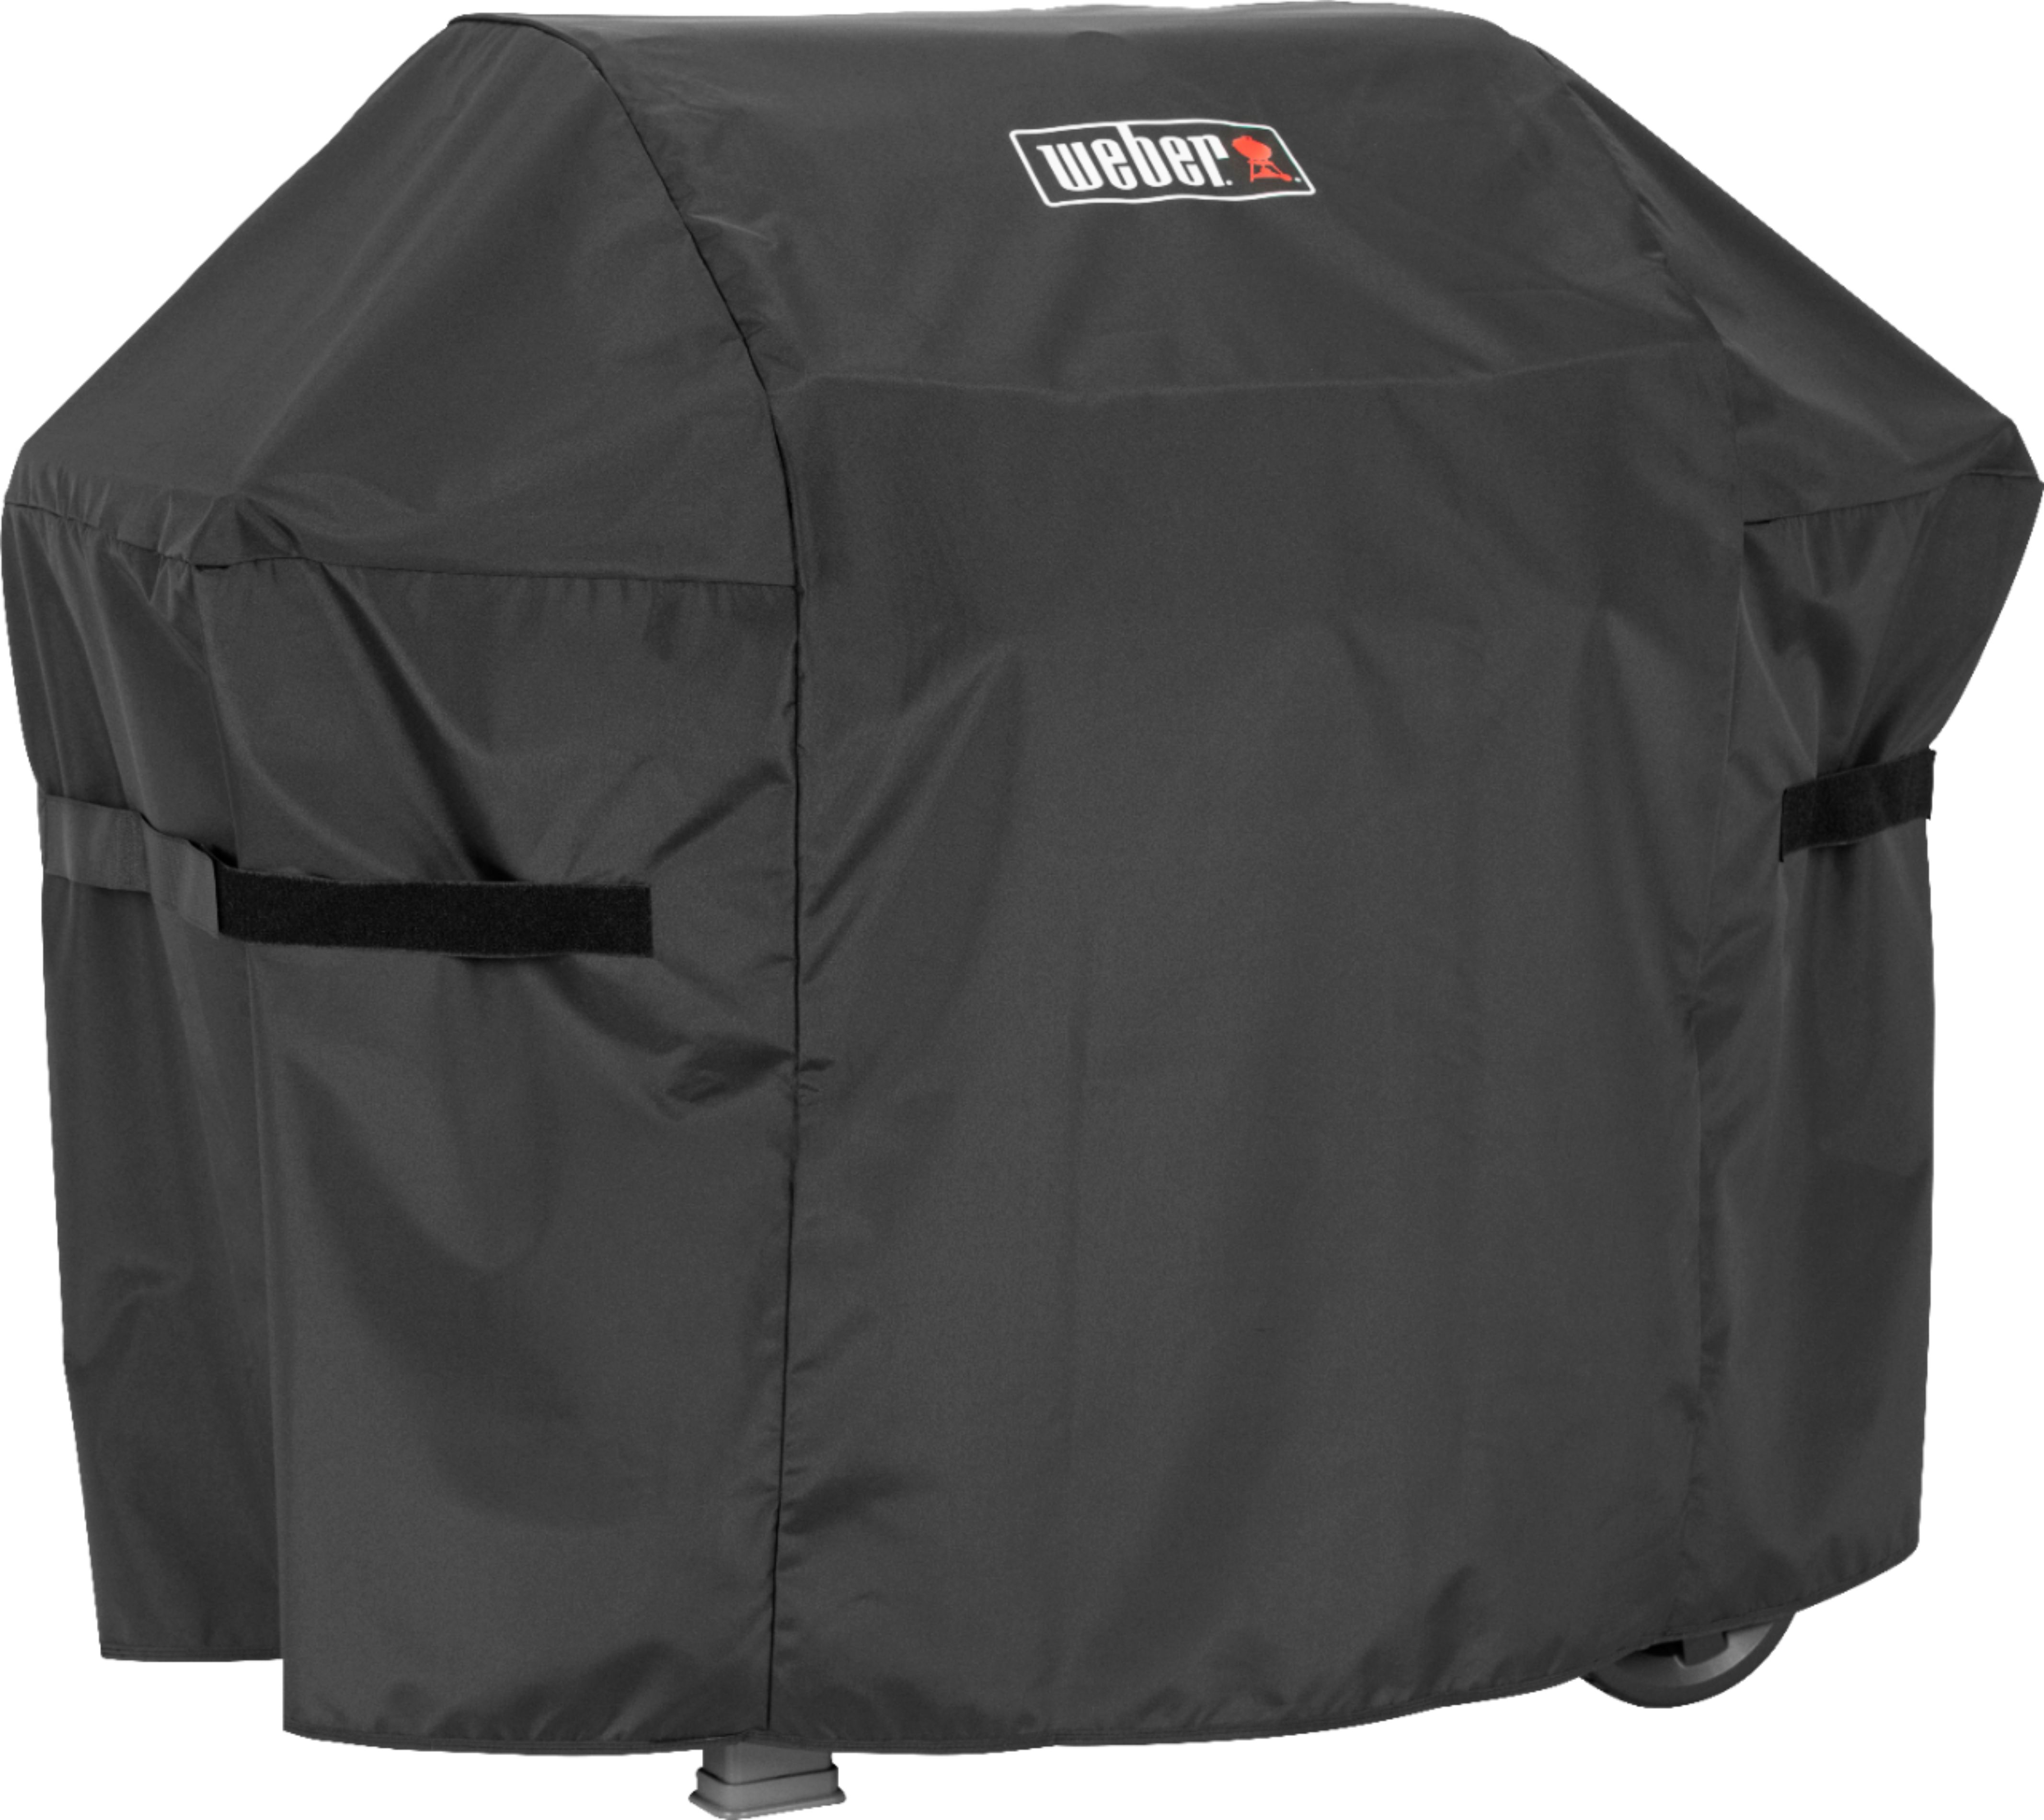 Weber and II Gas Grill Cover Black 7139 - Best Buy